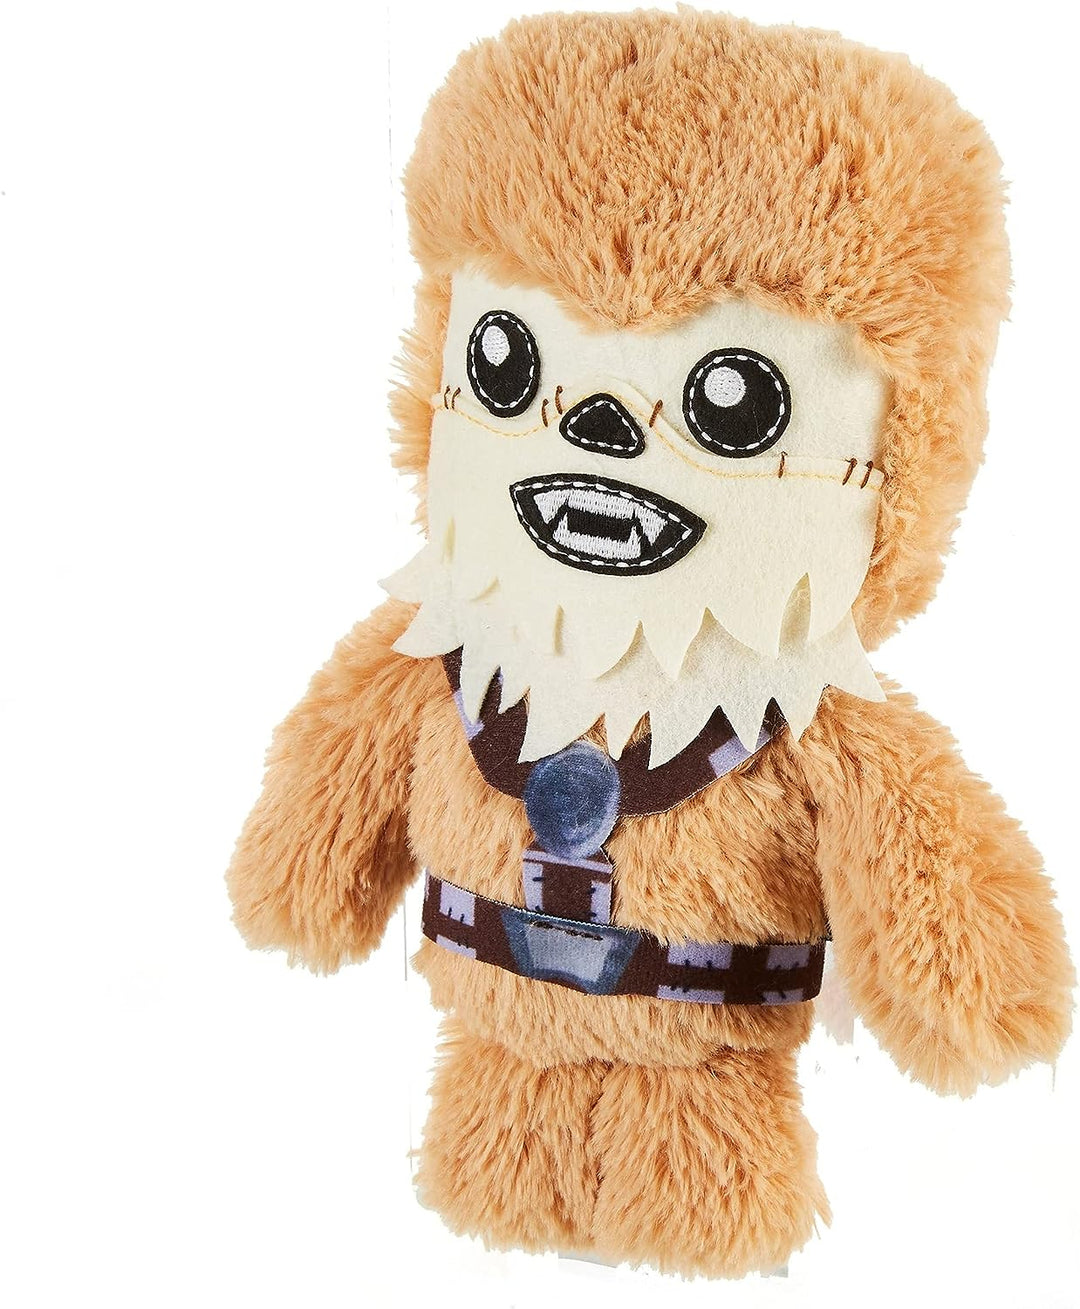 Star Wars Galaxy's Edge Trading Outpost Wookiee Plush